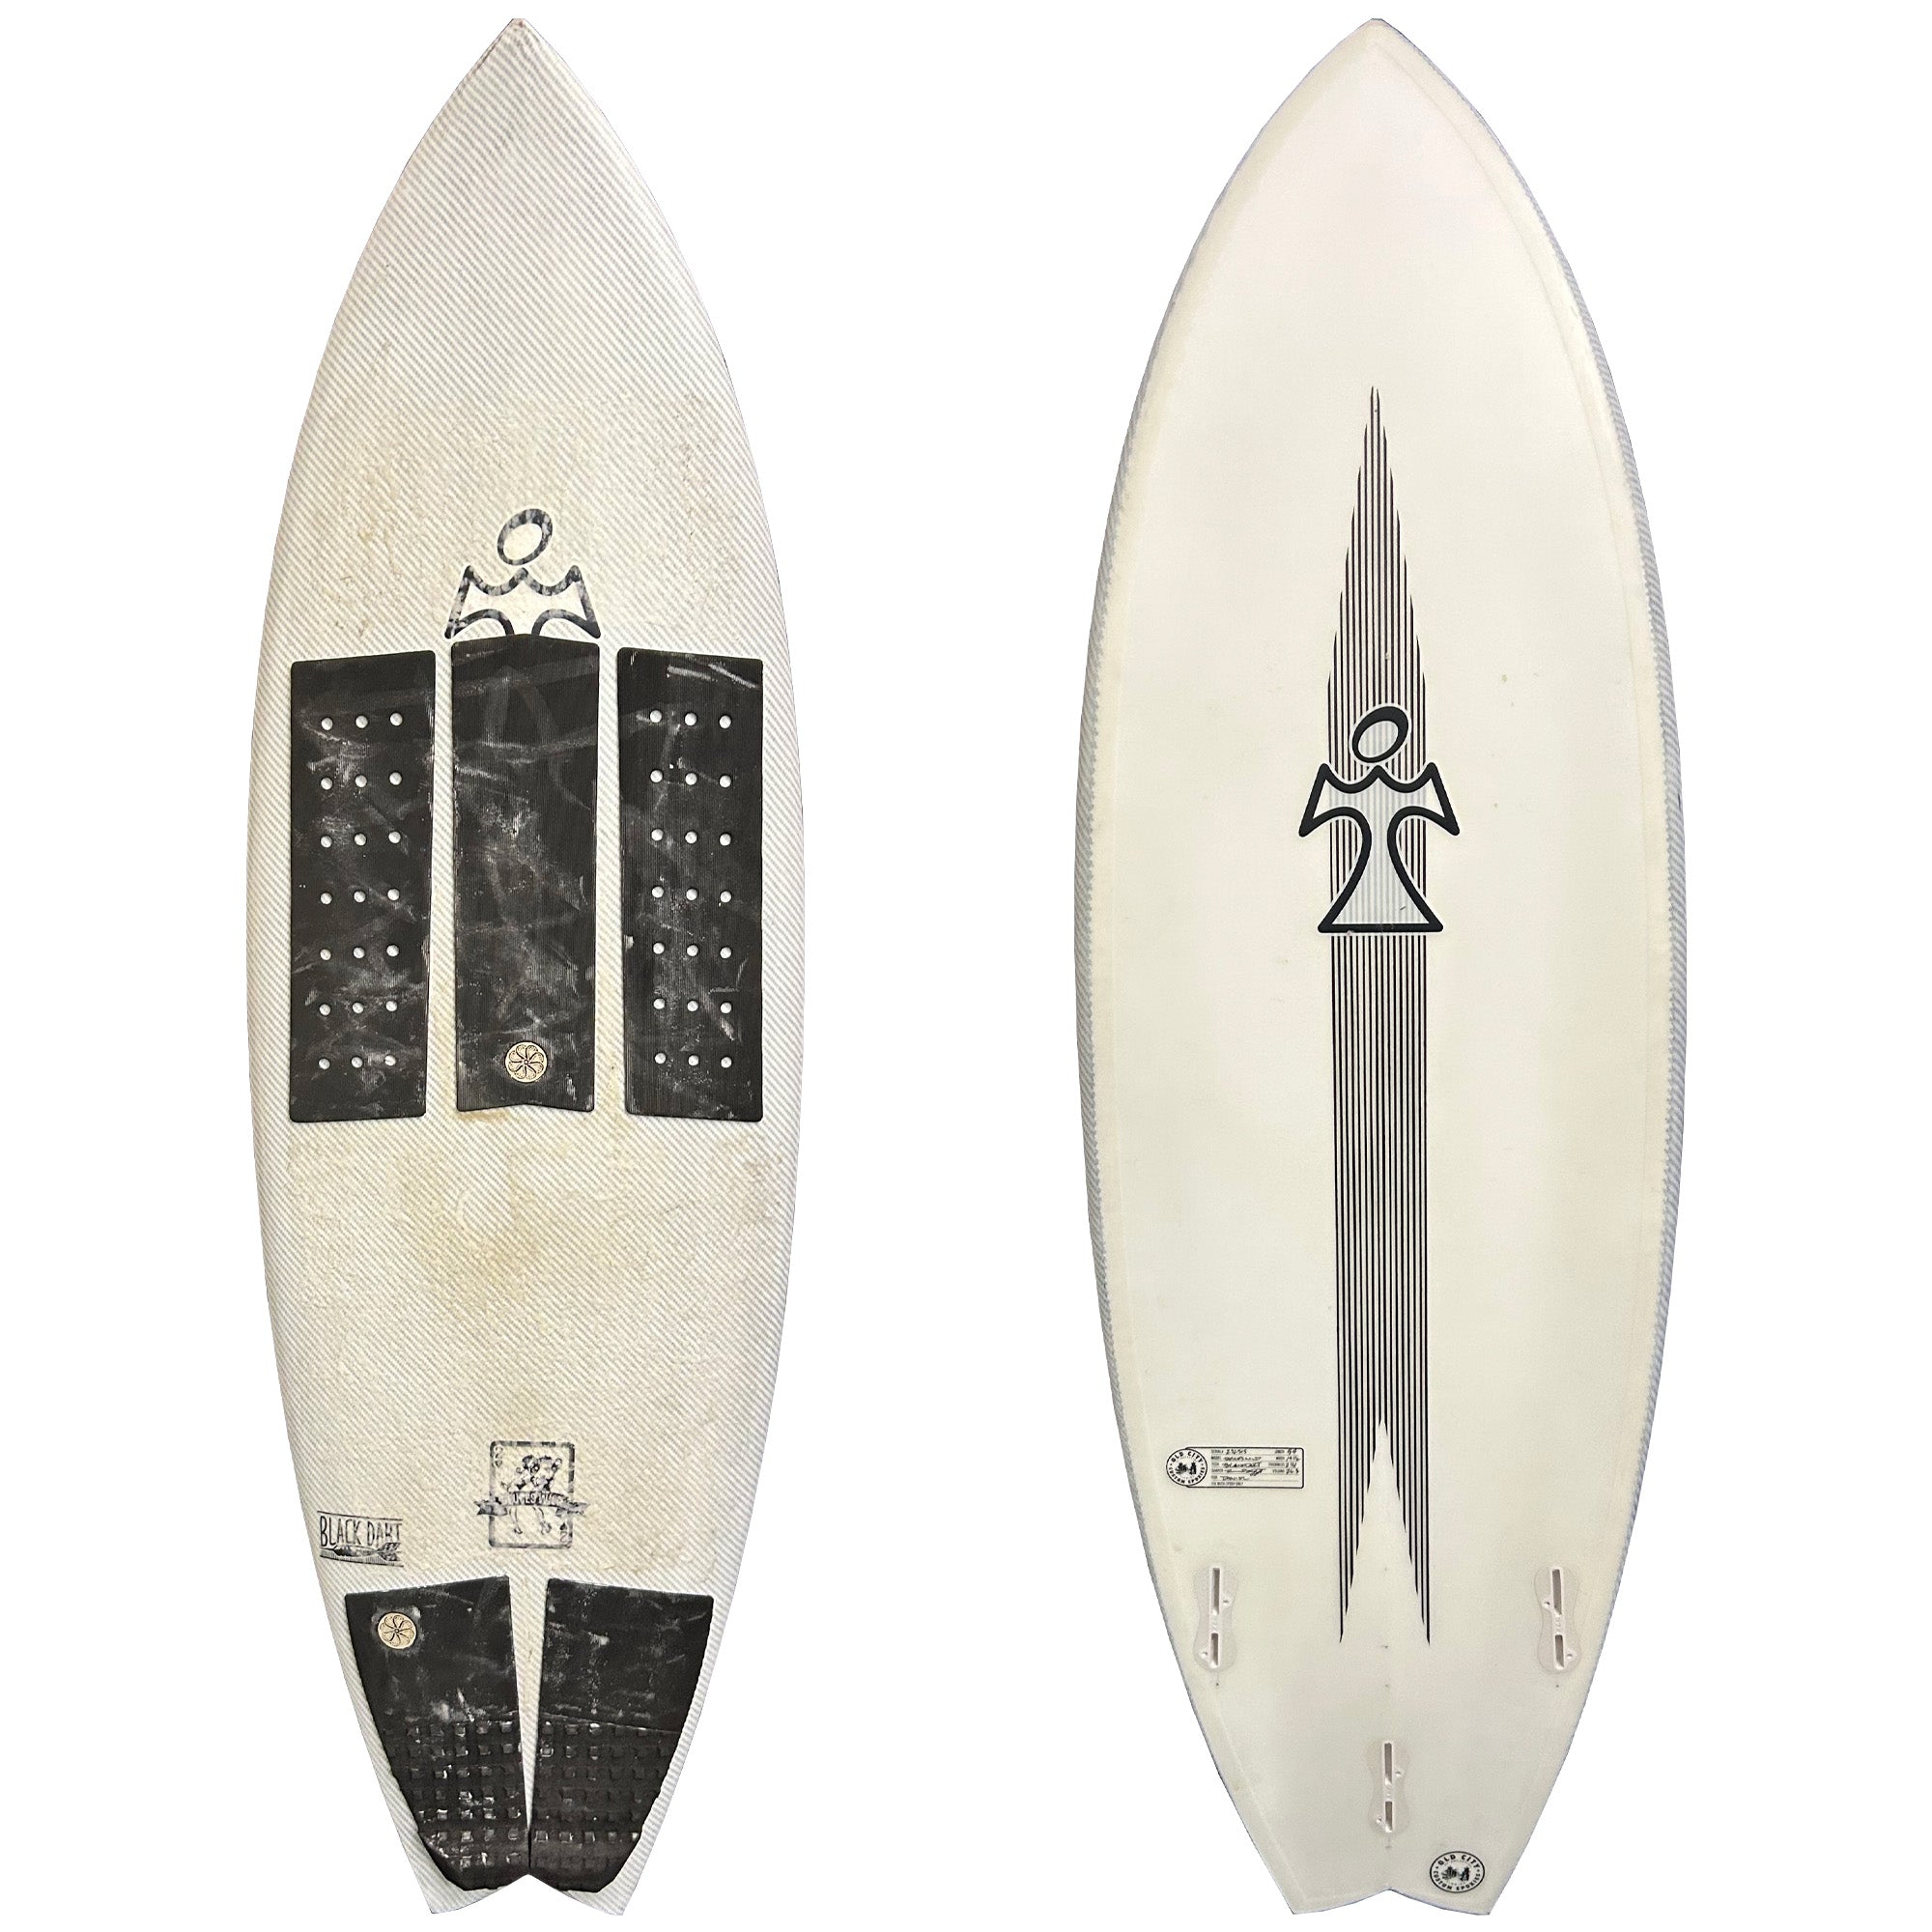 Inspired Deuces Wild 5'4 Used Surfboard